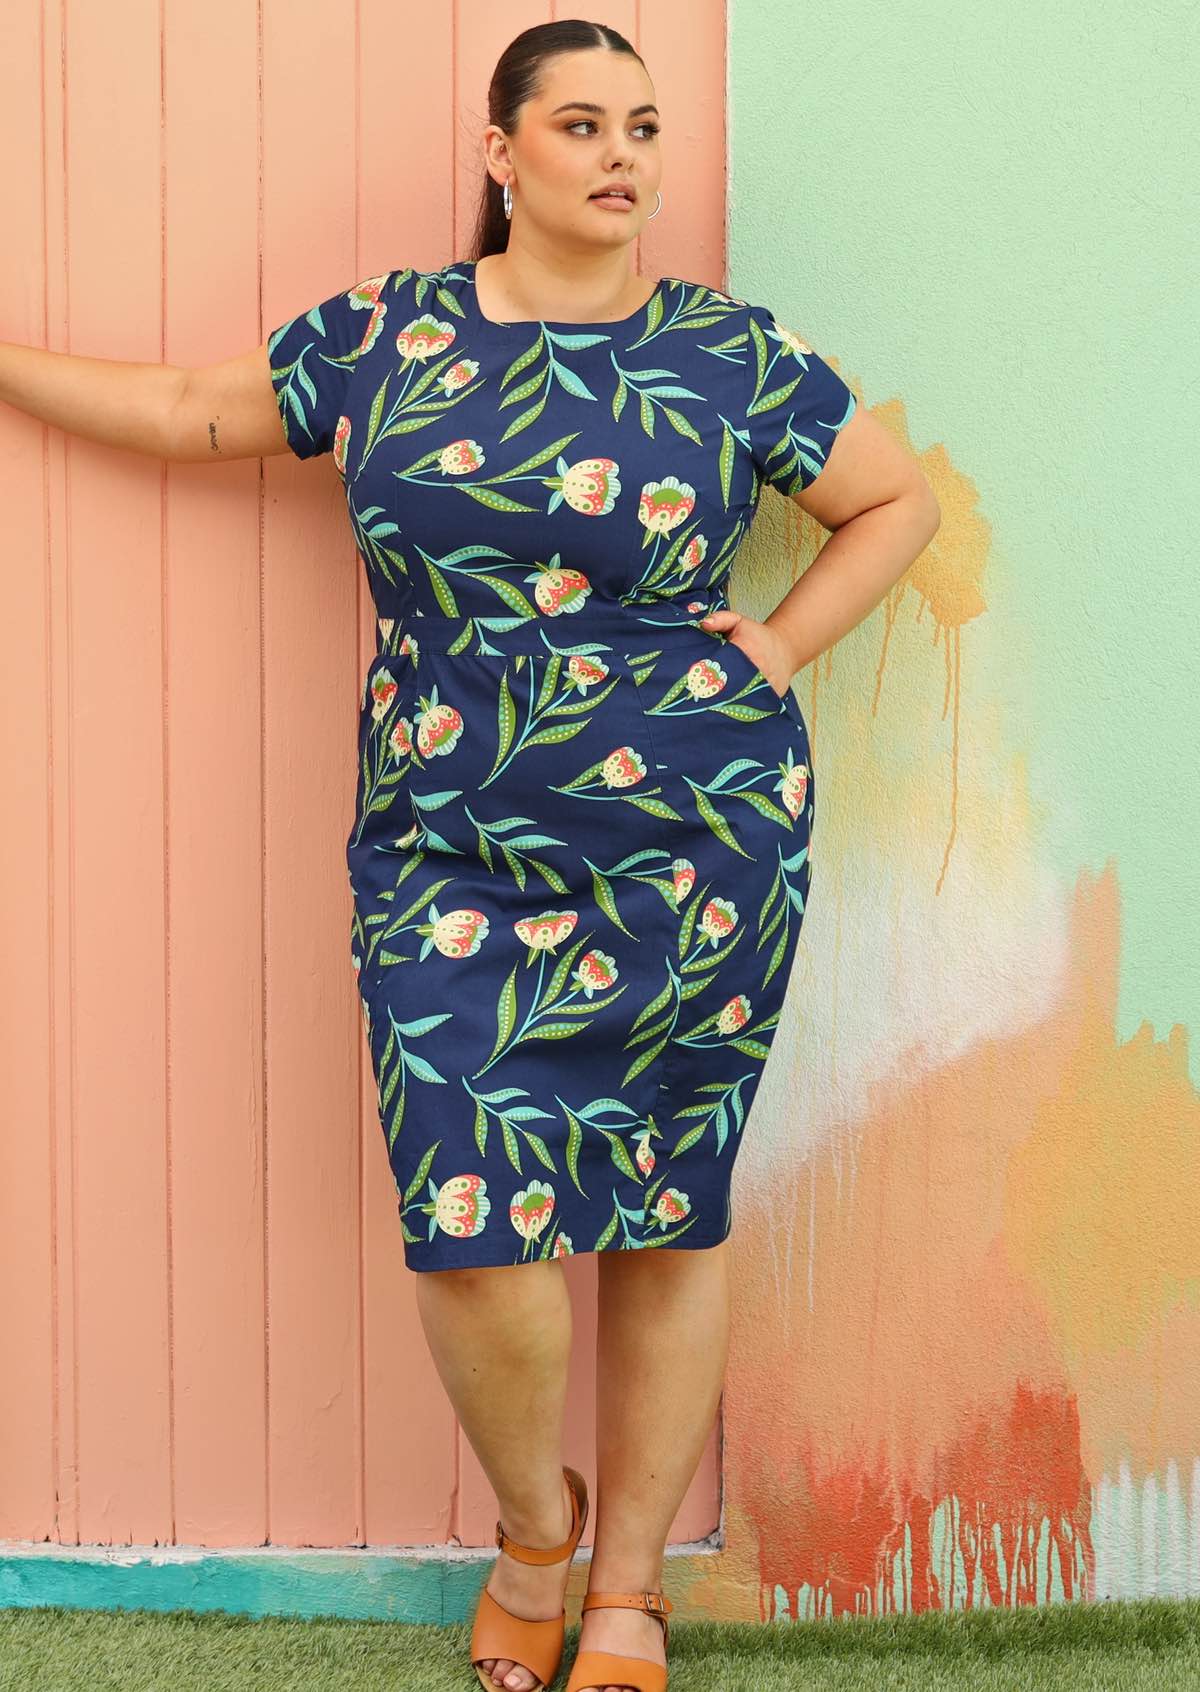 size 18 model wearing flattering cotton dress in navy blue with pockets